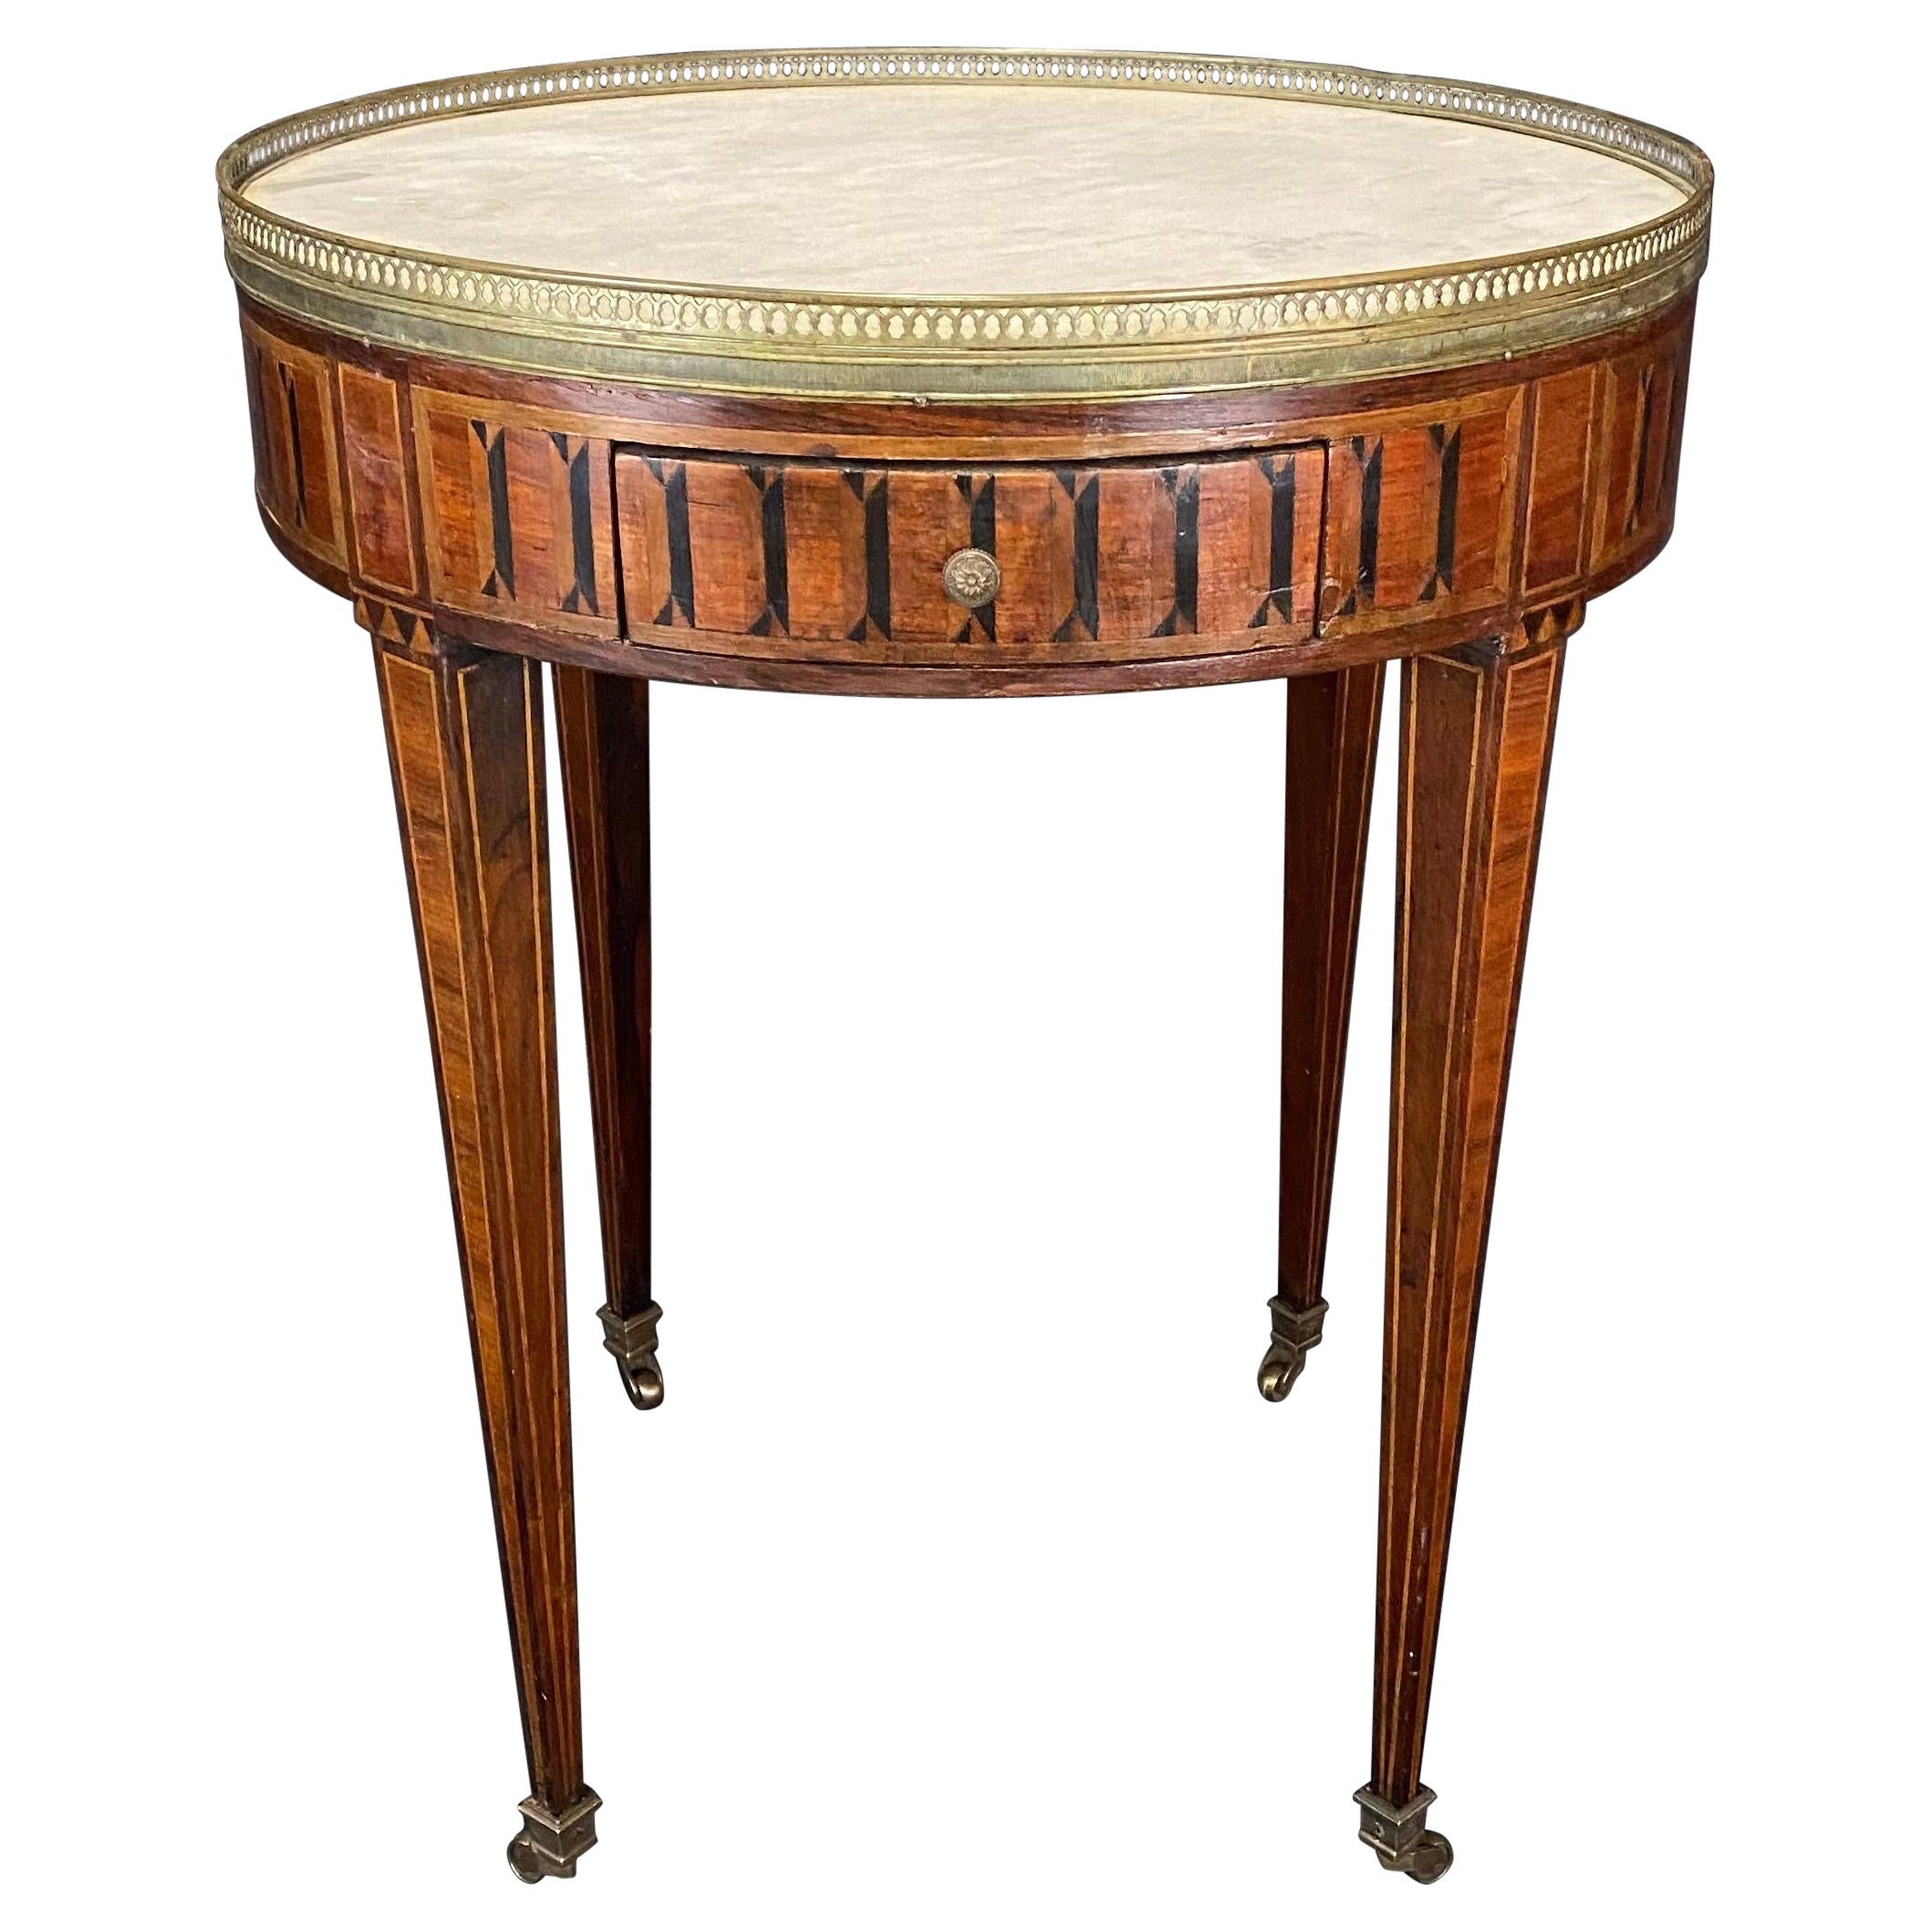 French Louis XVI Antique Marble Top Bouilette Marquetry Table For Sale